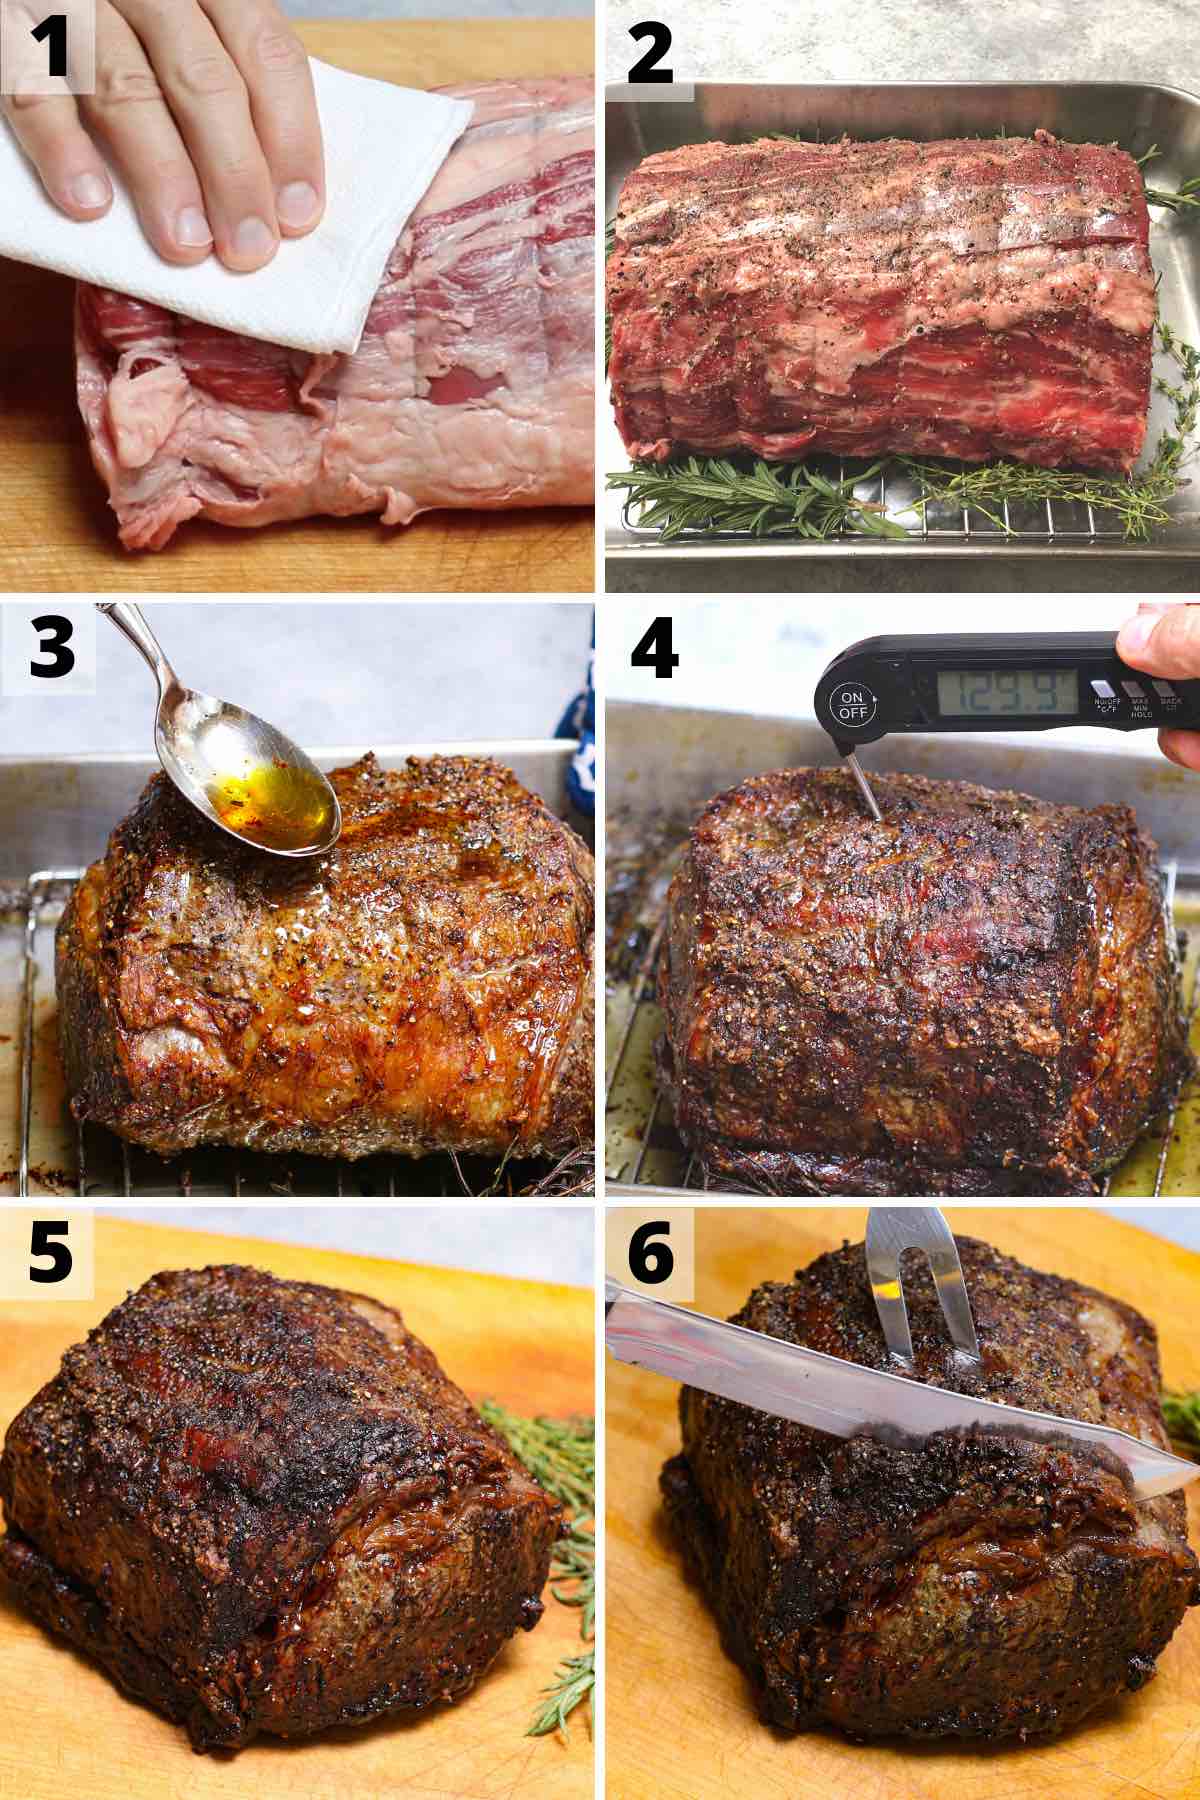 Steps for cooking a boneless rib roast in the oven